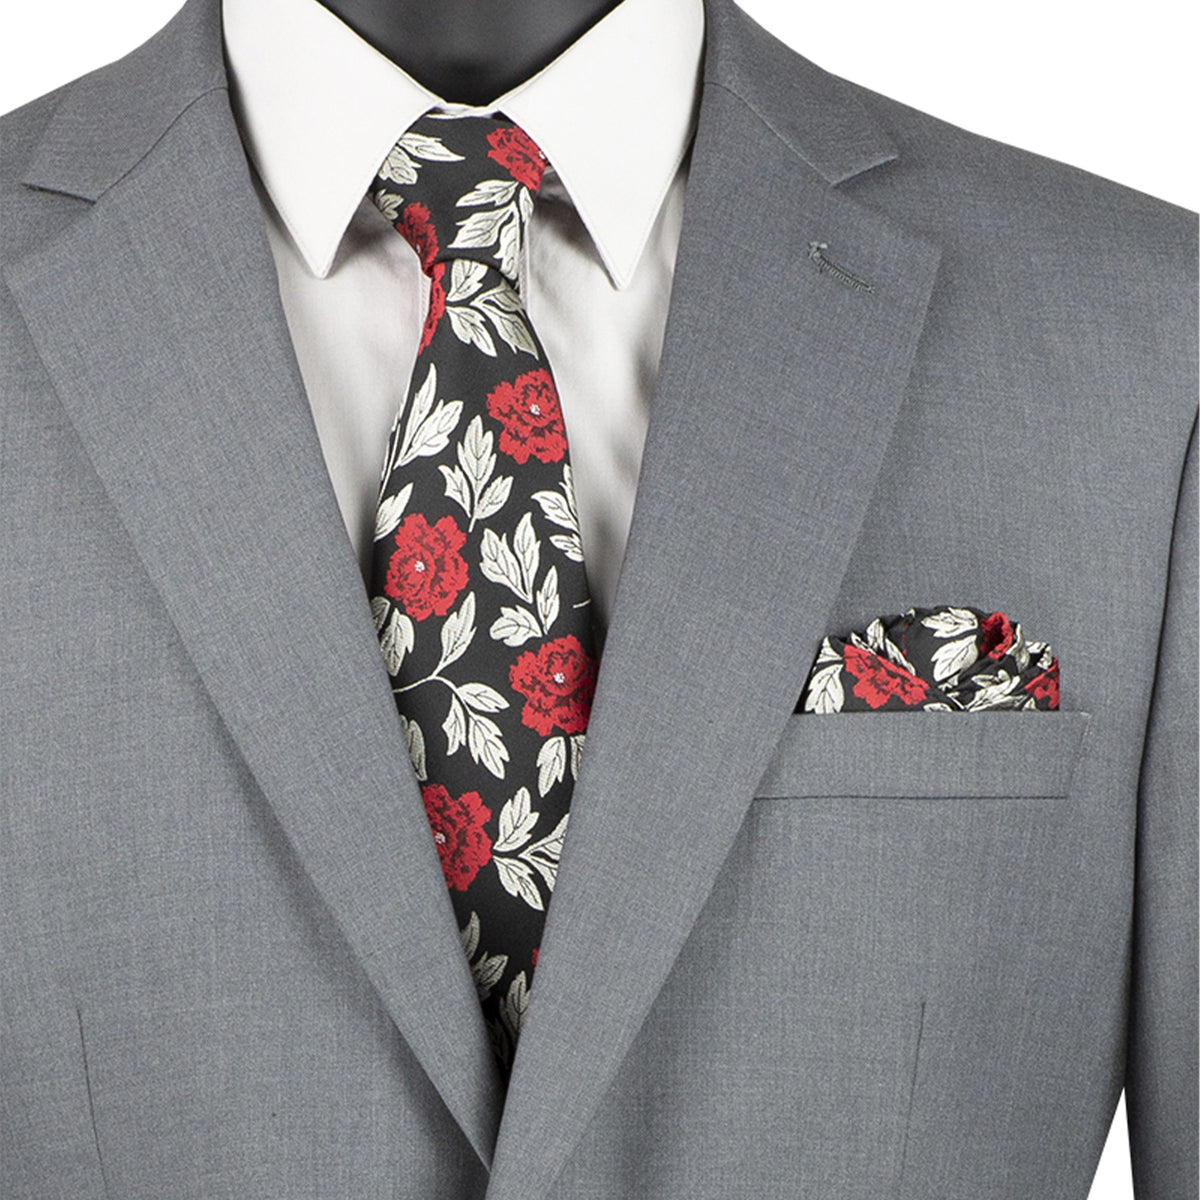 2-Button Classic-Fit Suit w/ Adjustable Waistband in Medium Gray